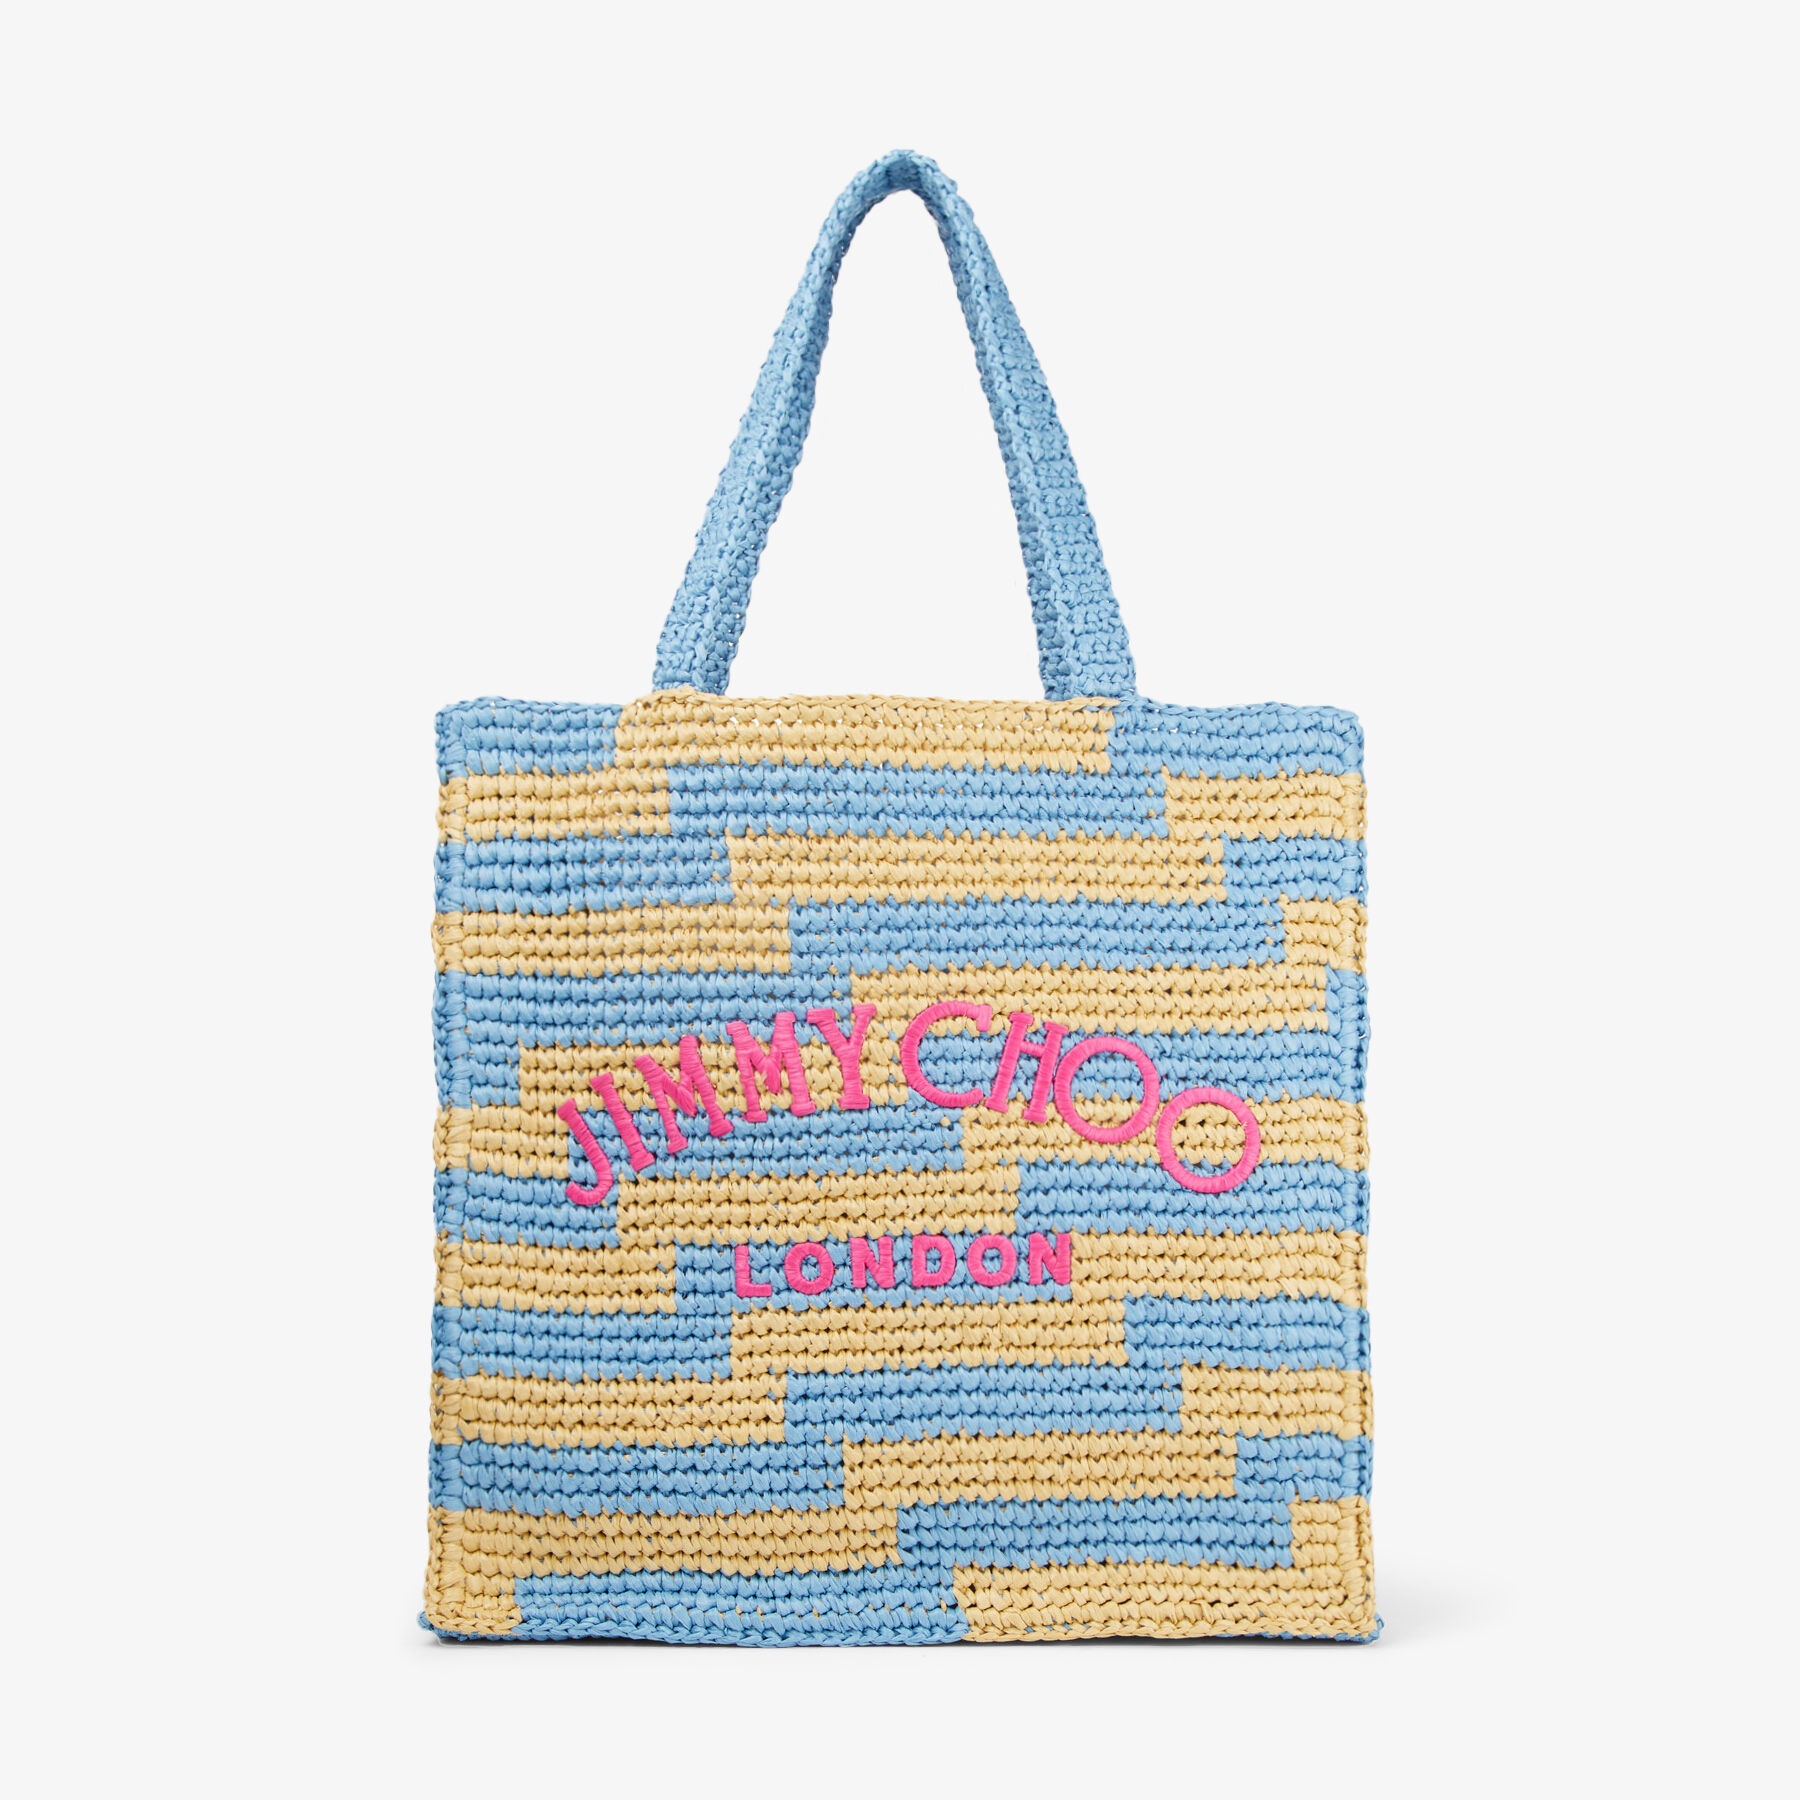 Beach Tote S
Natural and Smoky Blue Avenue Crochet Tote Bag - 1